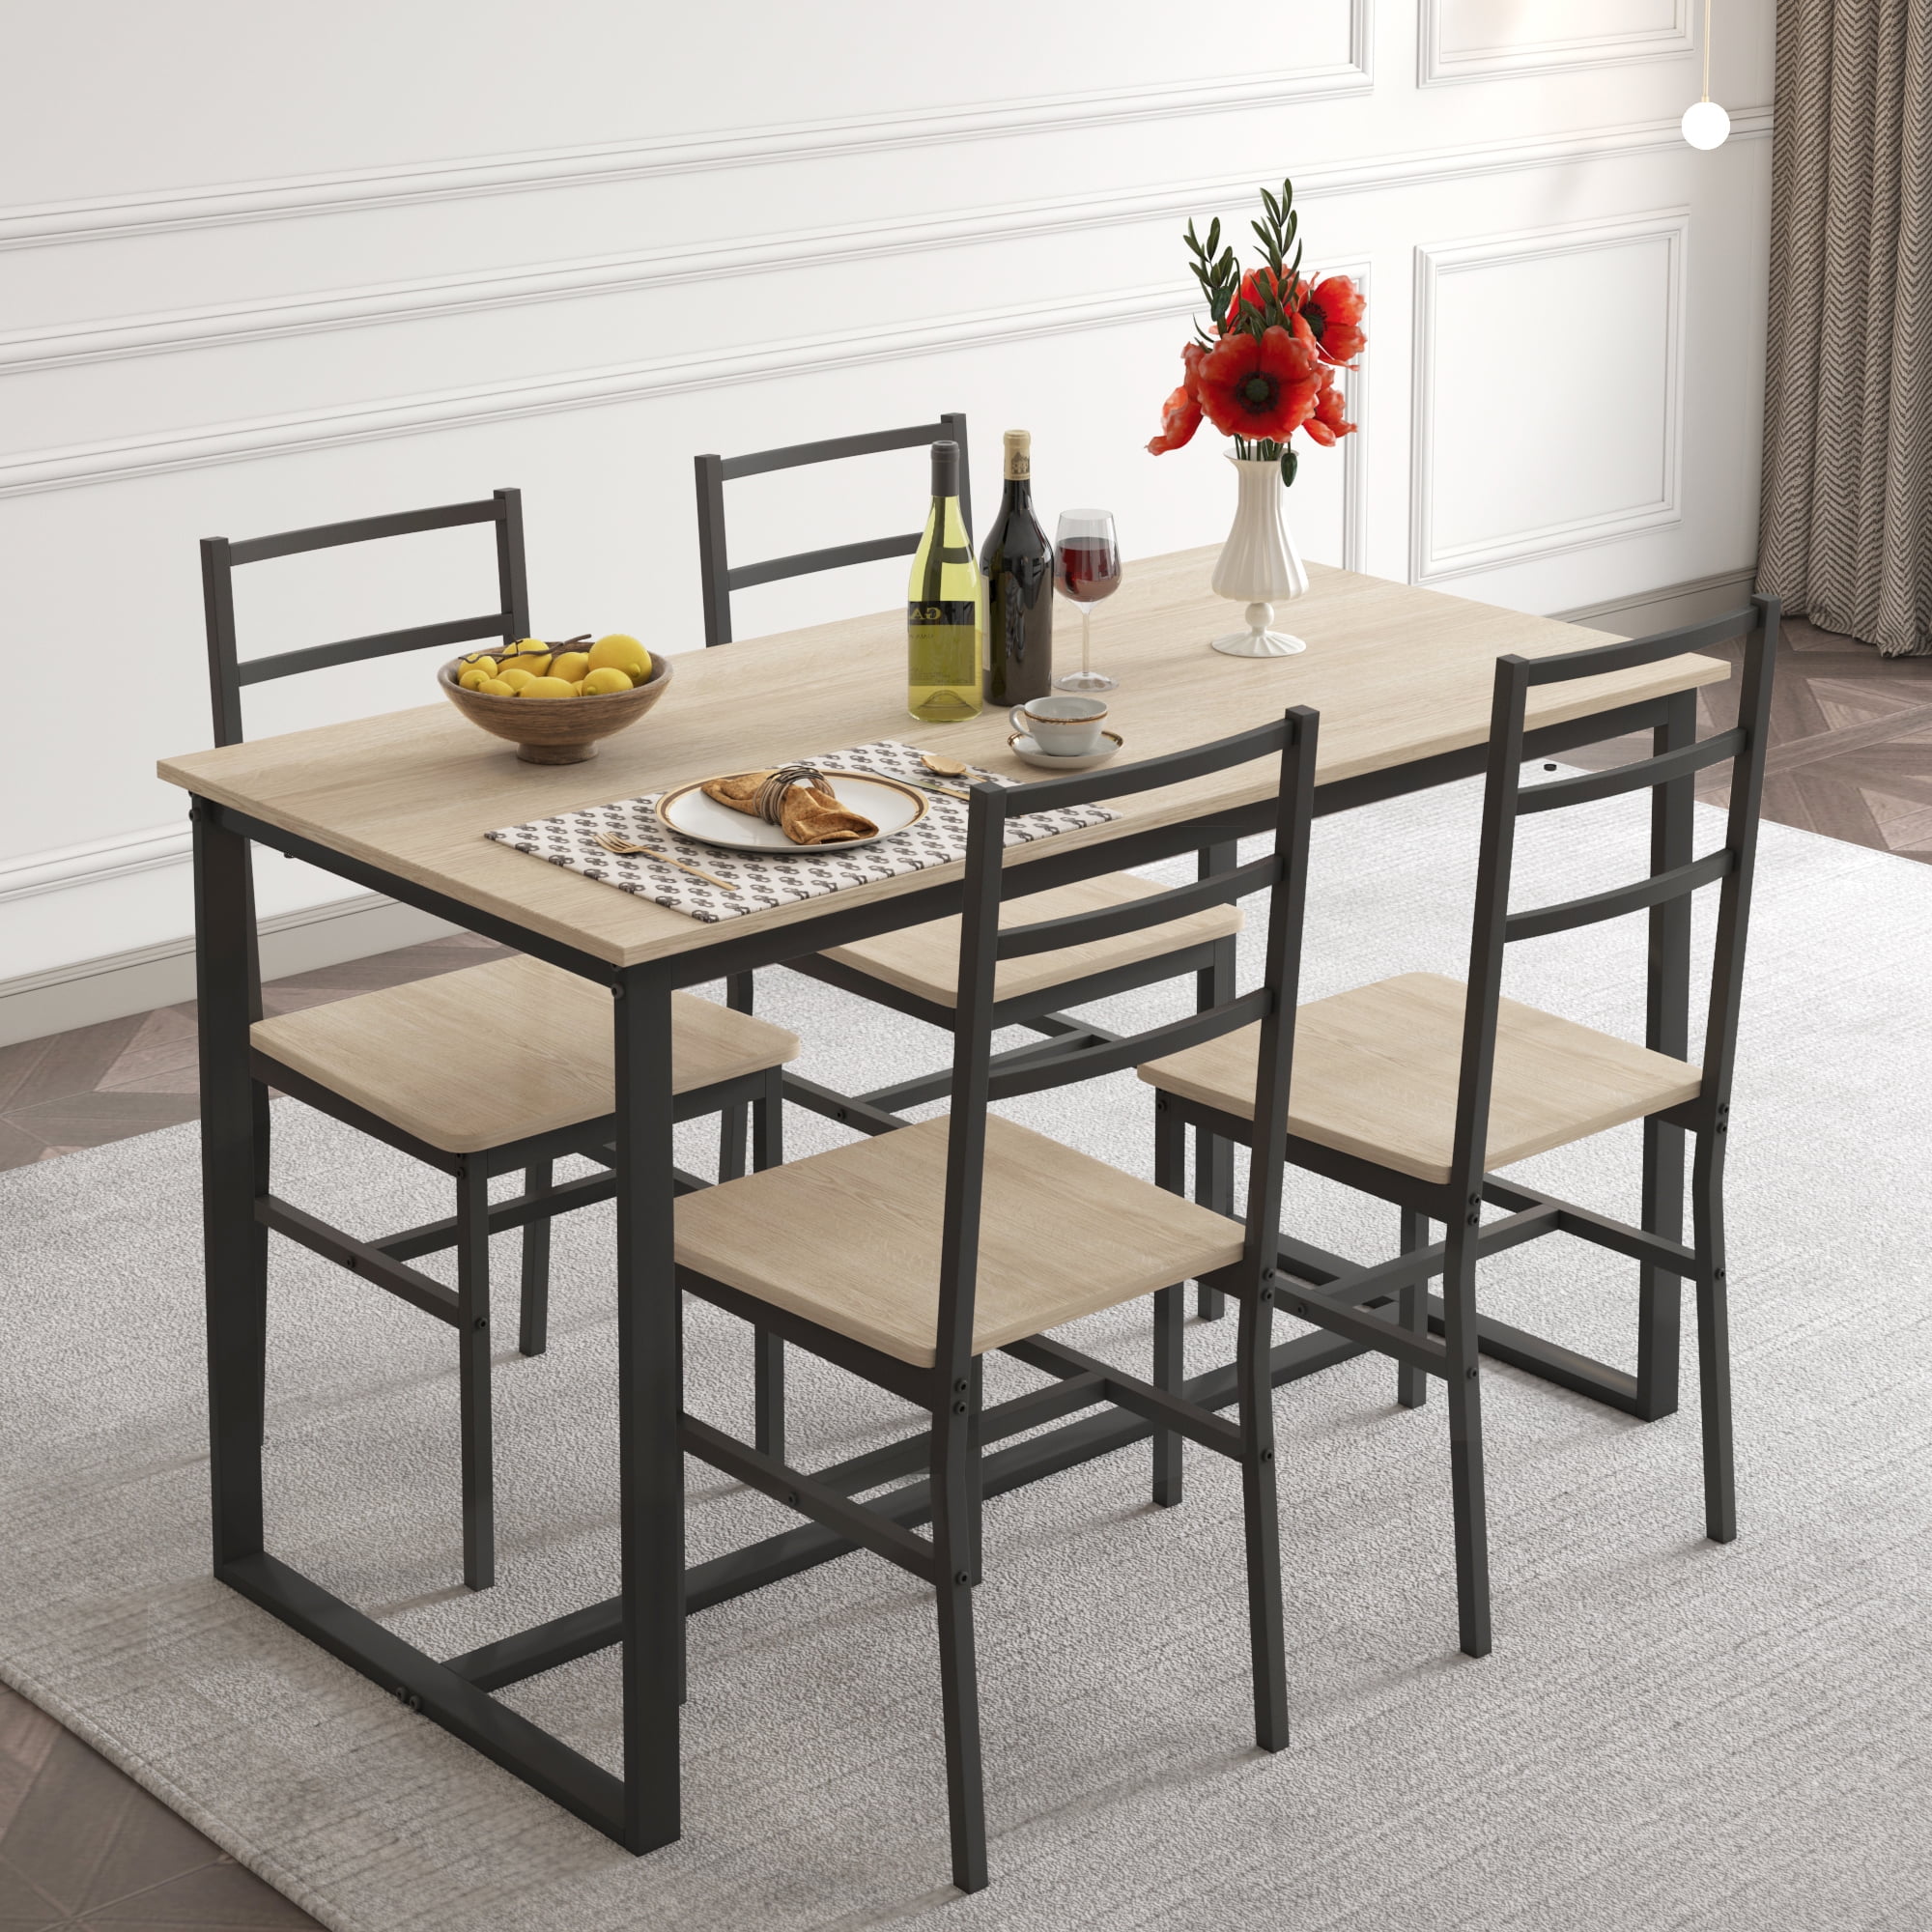 SYNGAR 5 Piece Dining Set, Dining Table Set for 4, Modern Dining Room ...